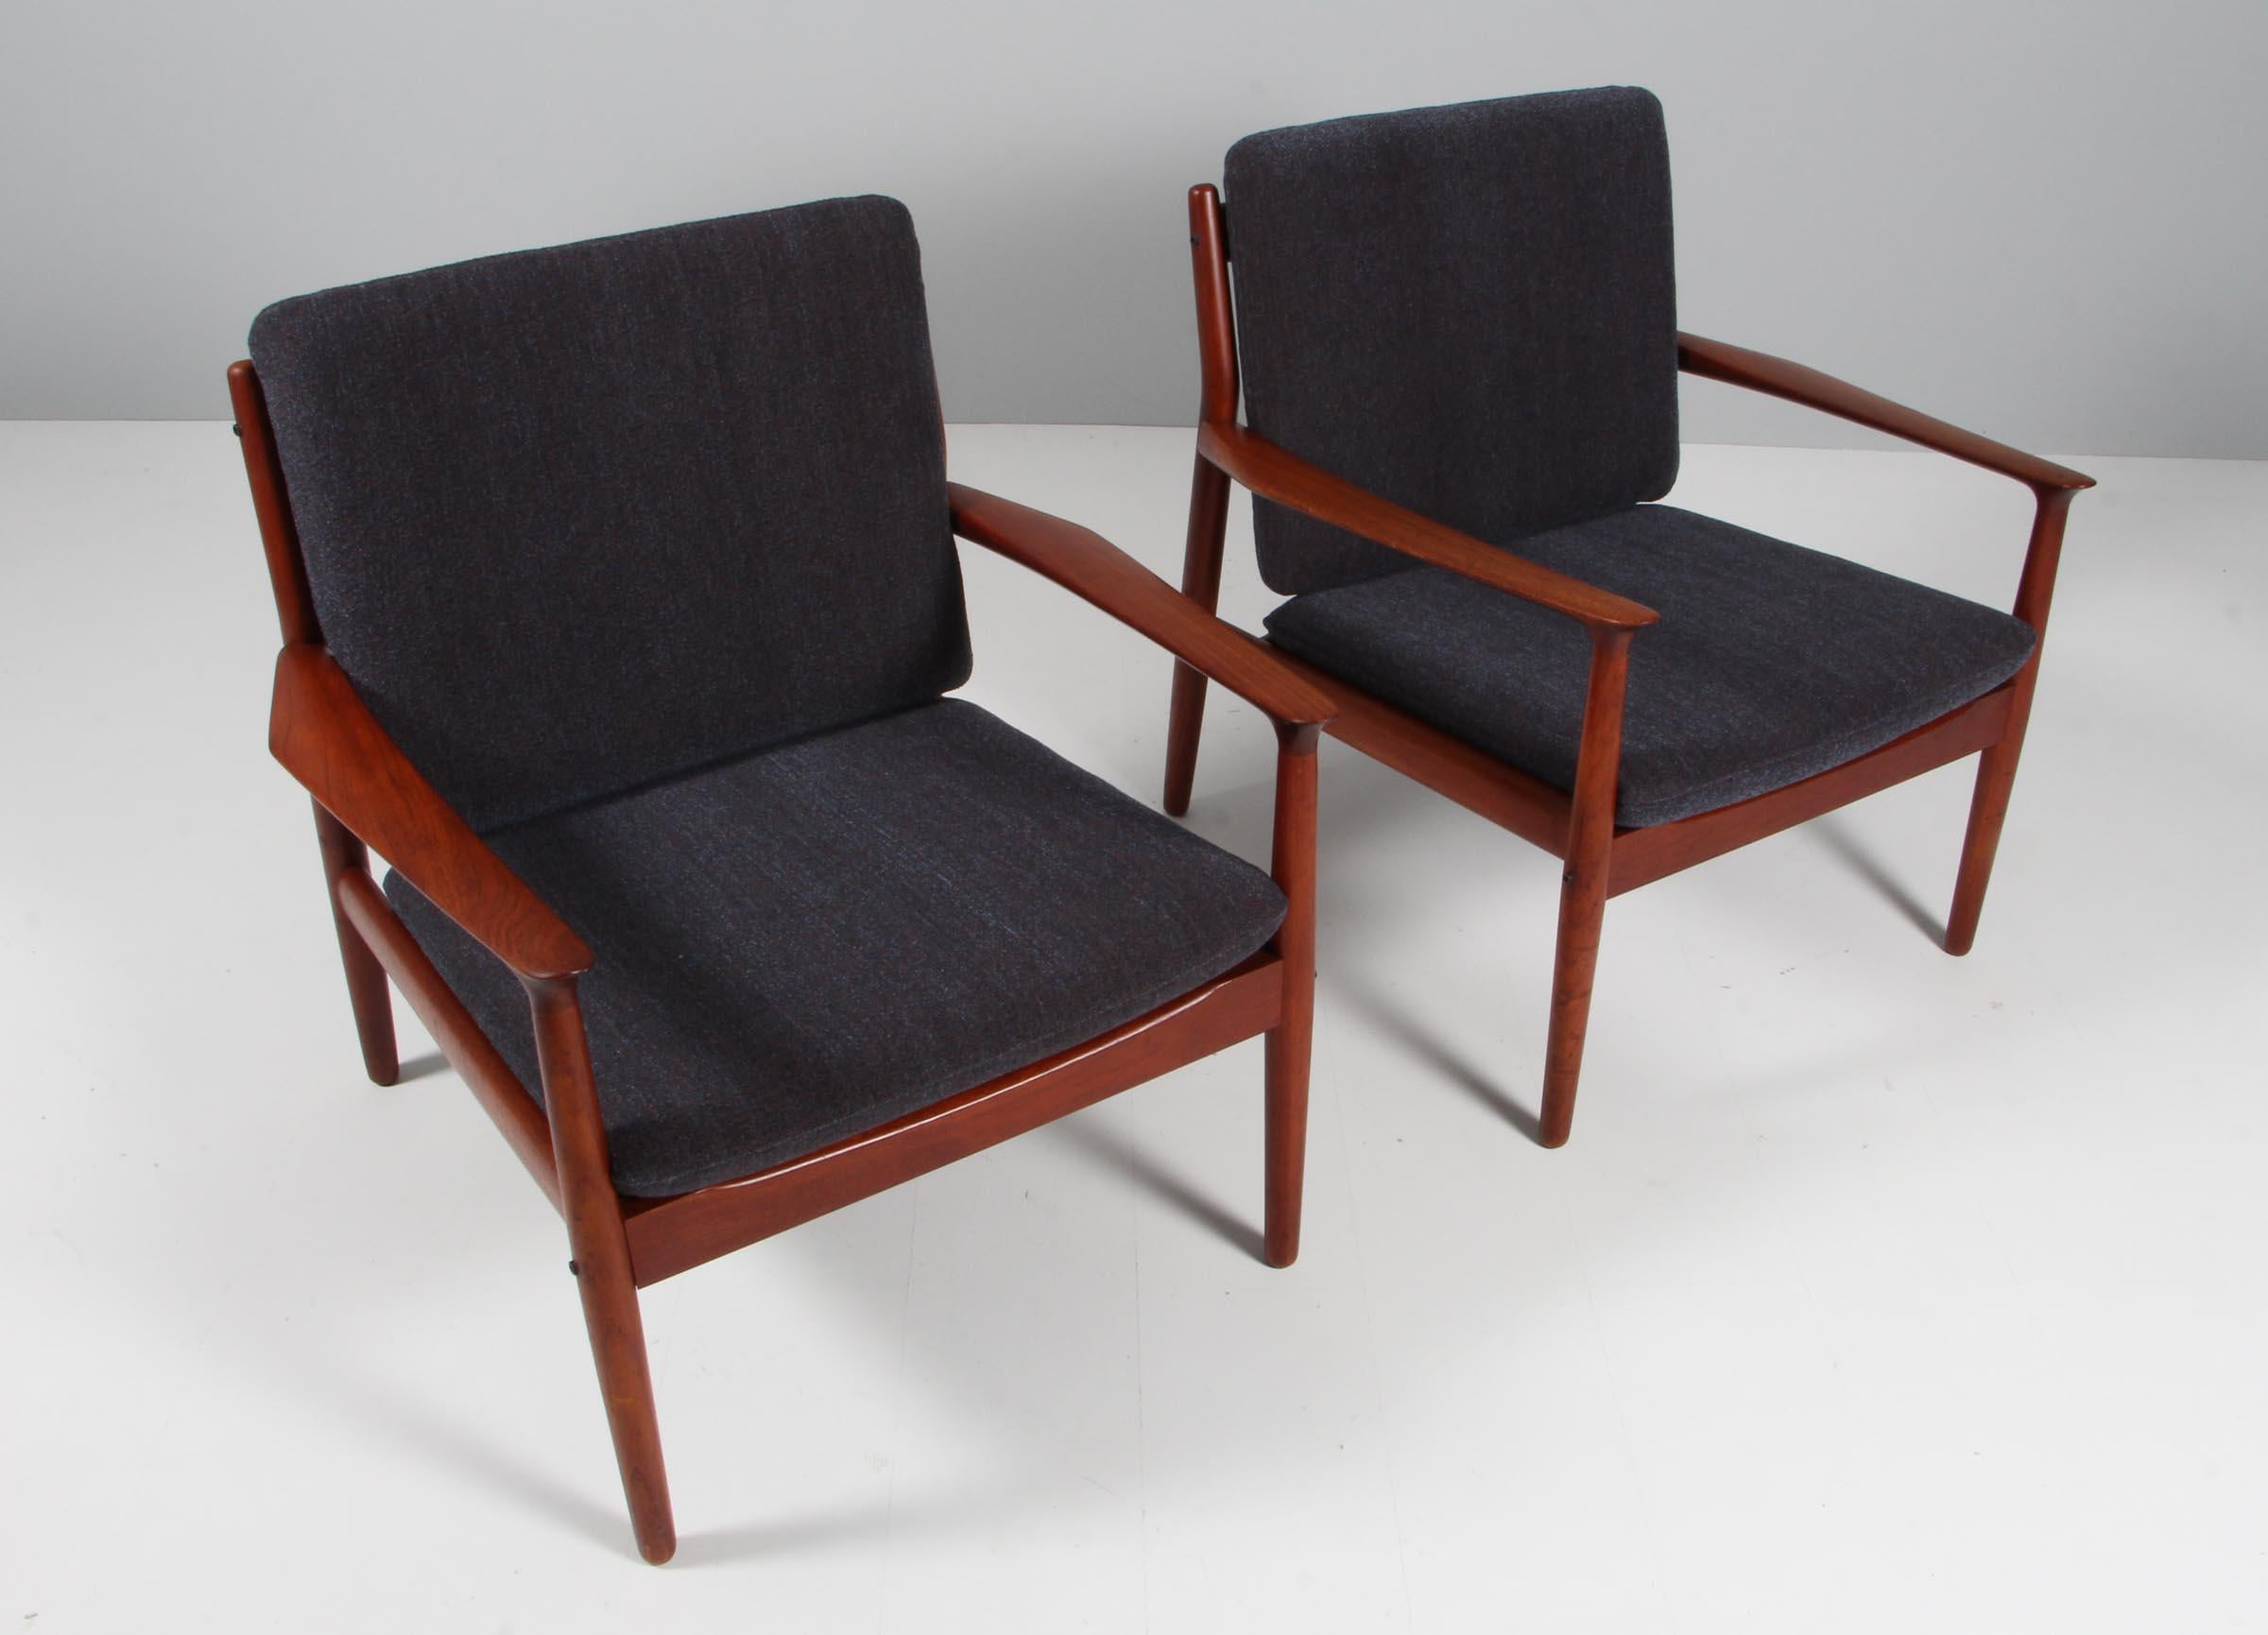 Pair of Grete Jalk armchairs in teak

New upholstered cushions with textured fabric.

Made by Poul Jeppesen.